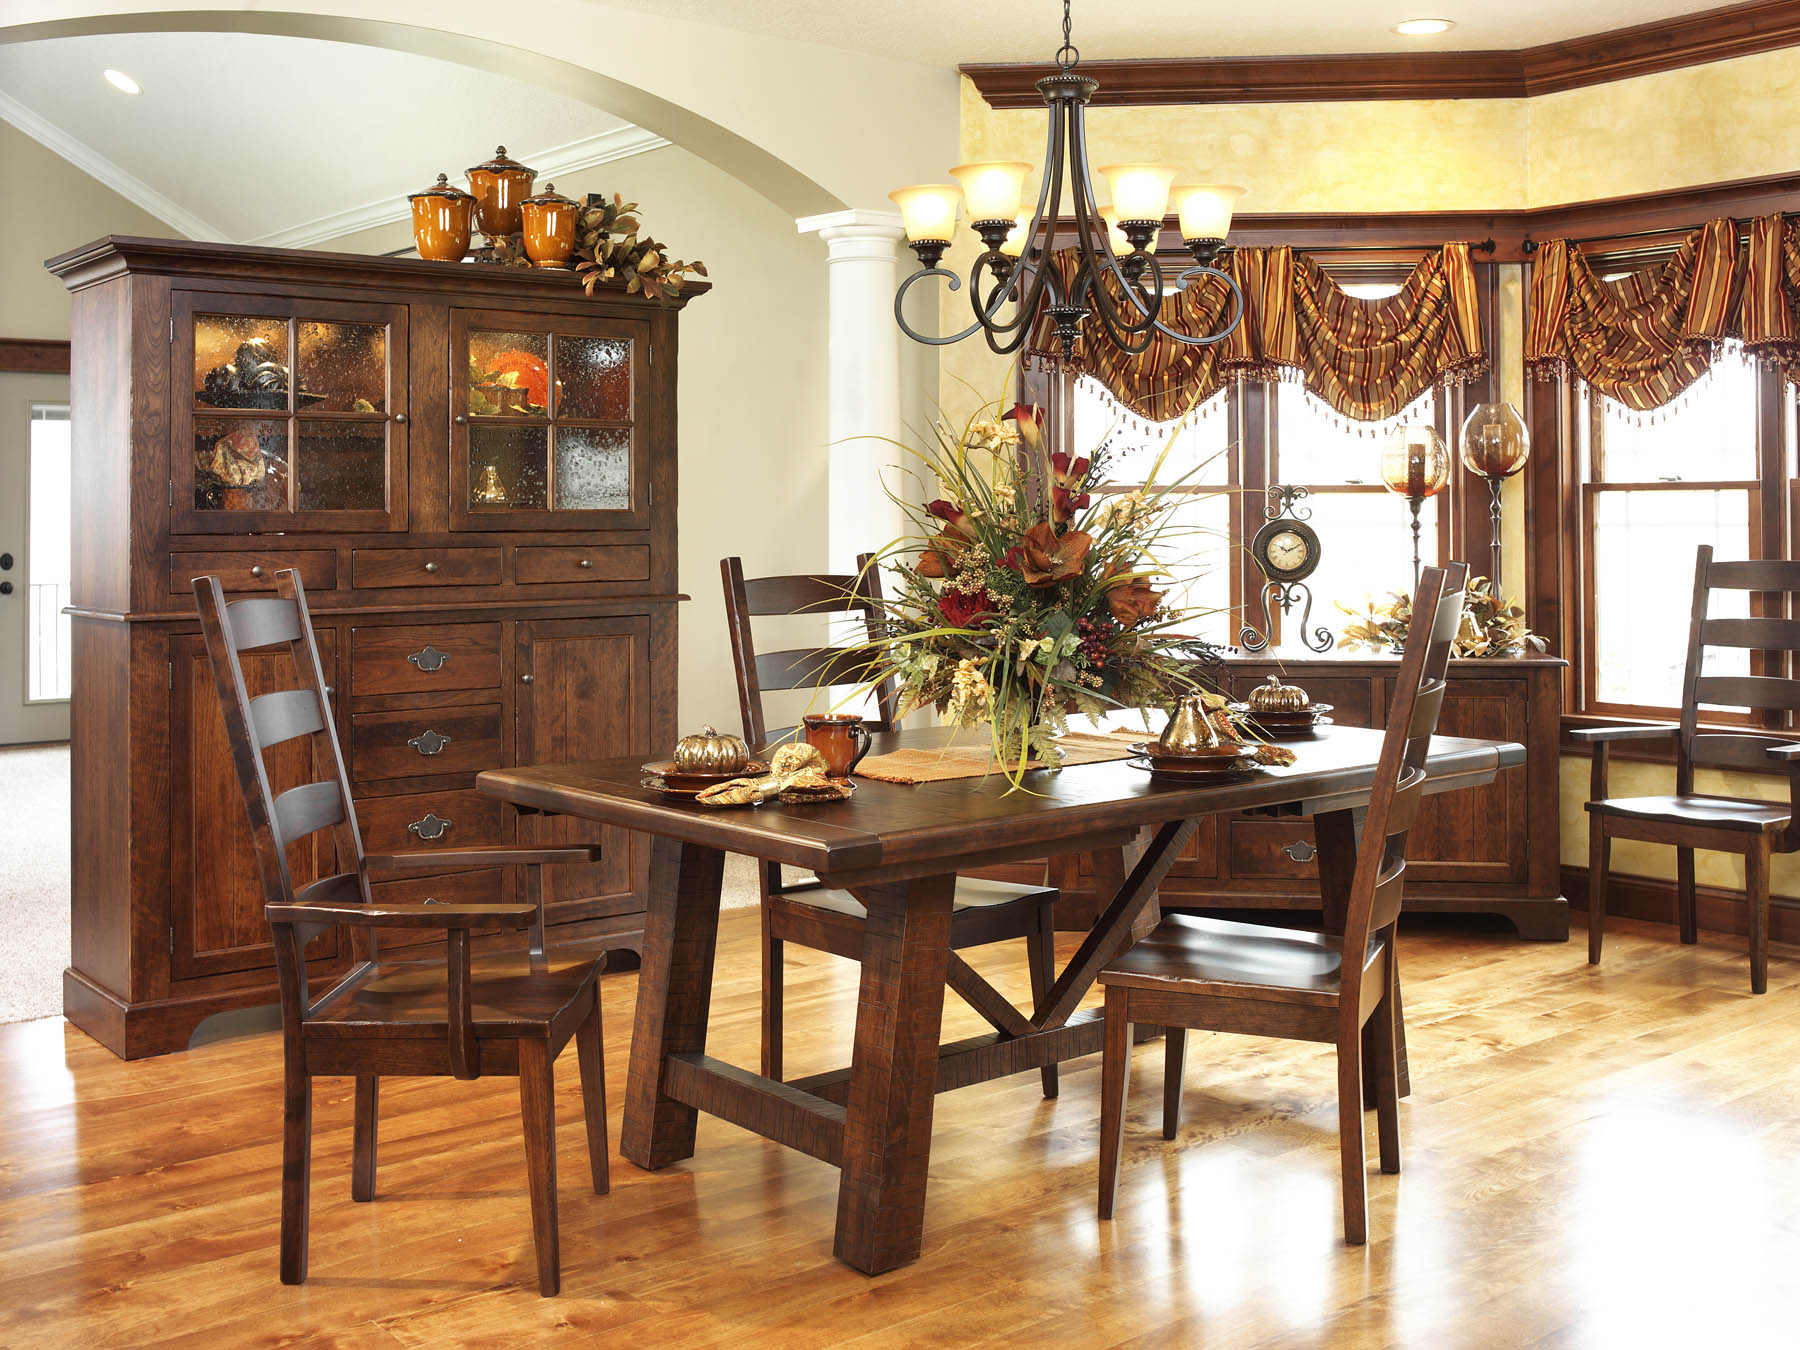 Timelessly Beautiful Country Dining Room Furniture Ideas for You